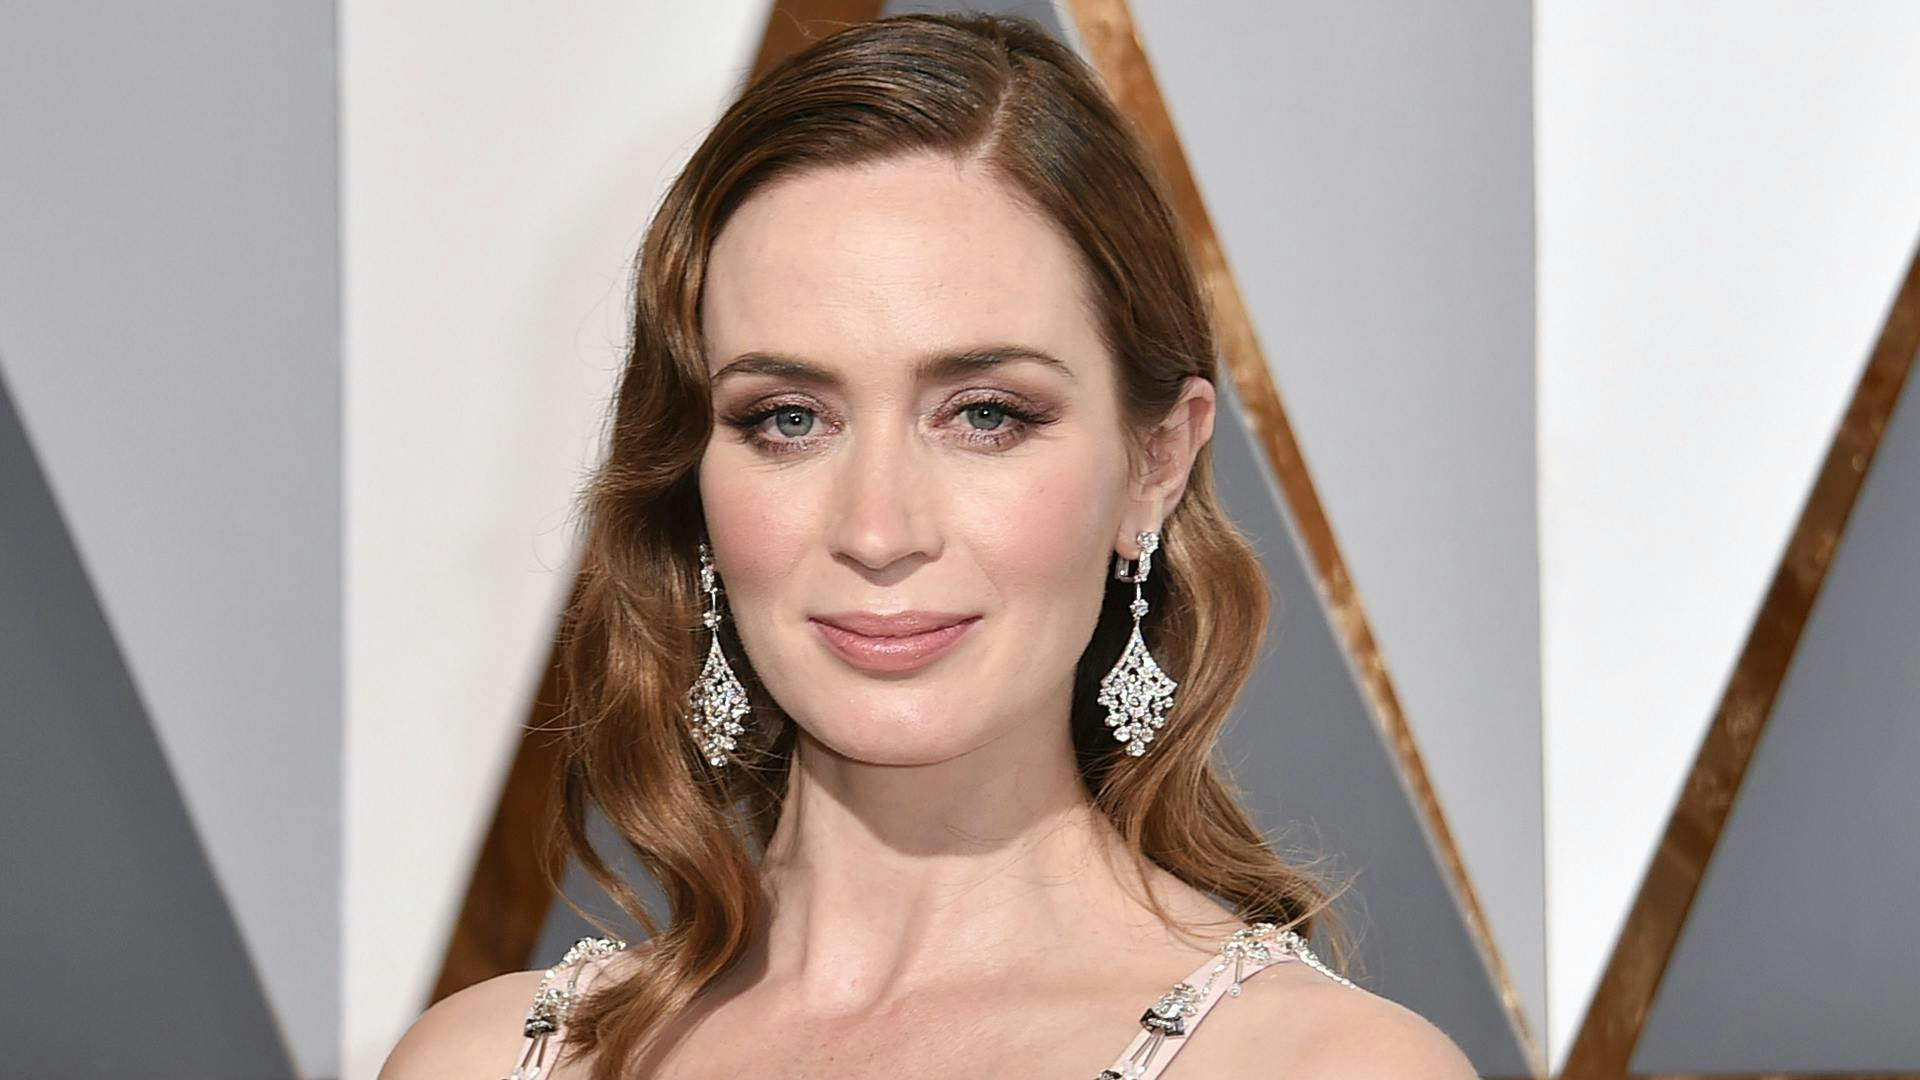 88th annual academy awards arrivals los angeles america 28 feb 2016 emily blunt oscar oscars topix pregnant bump pregnancy actor alone female personality 35141964 person human clothing apparel evening dress fashion gown robe